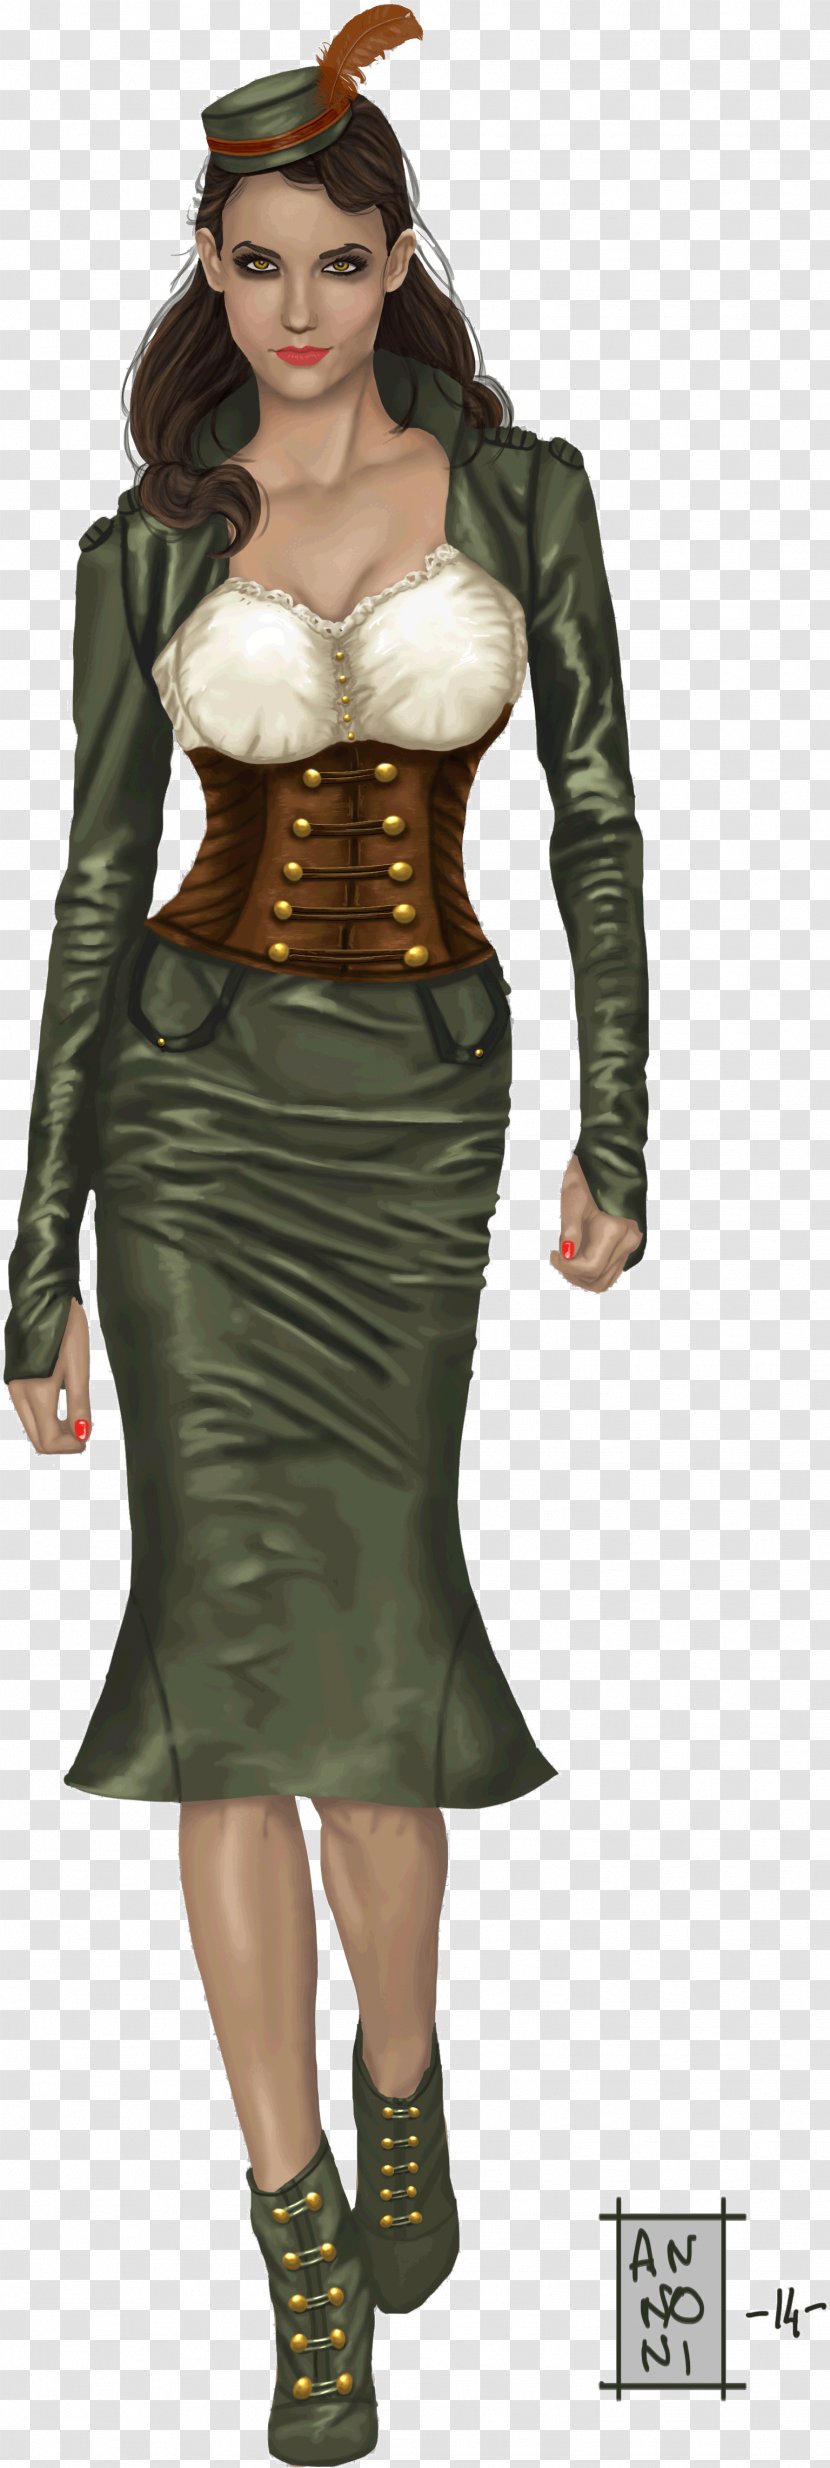 Role-playing Game Dress Woman - Corset Transparent PNG